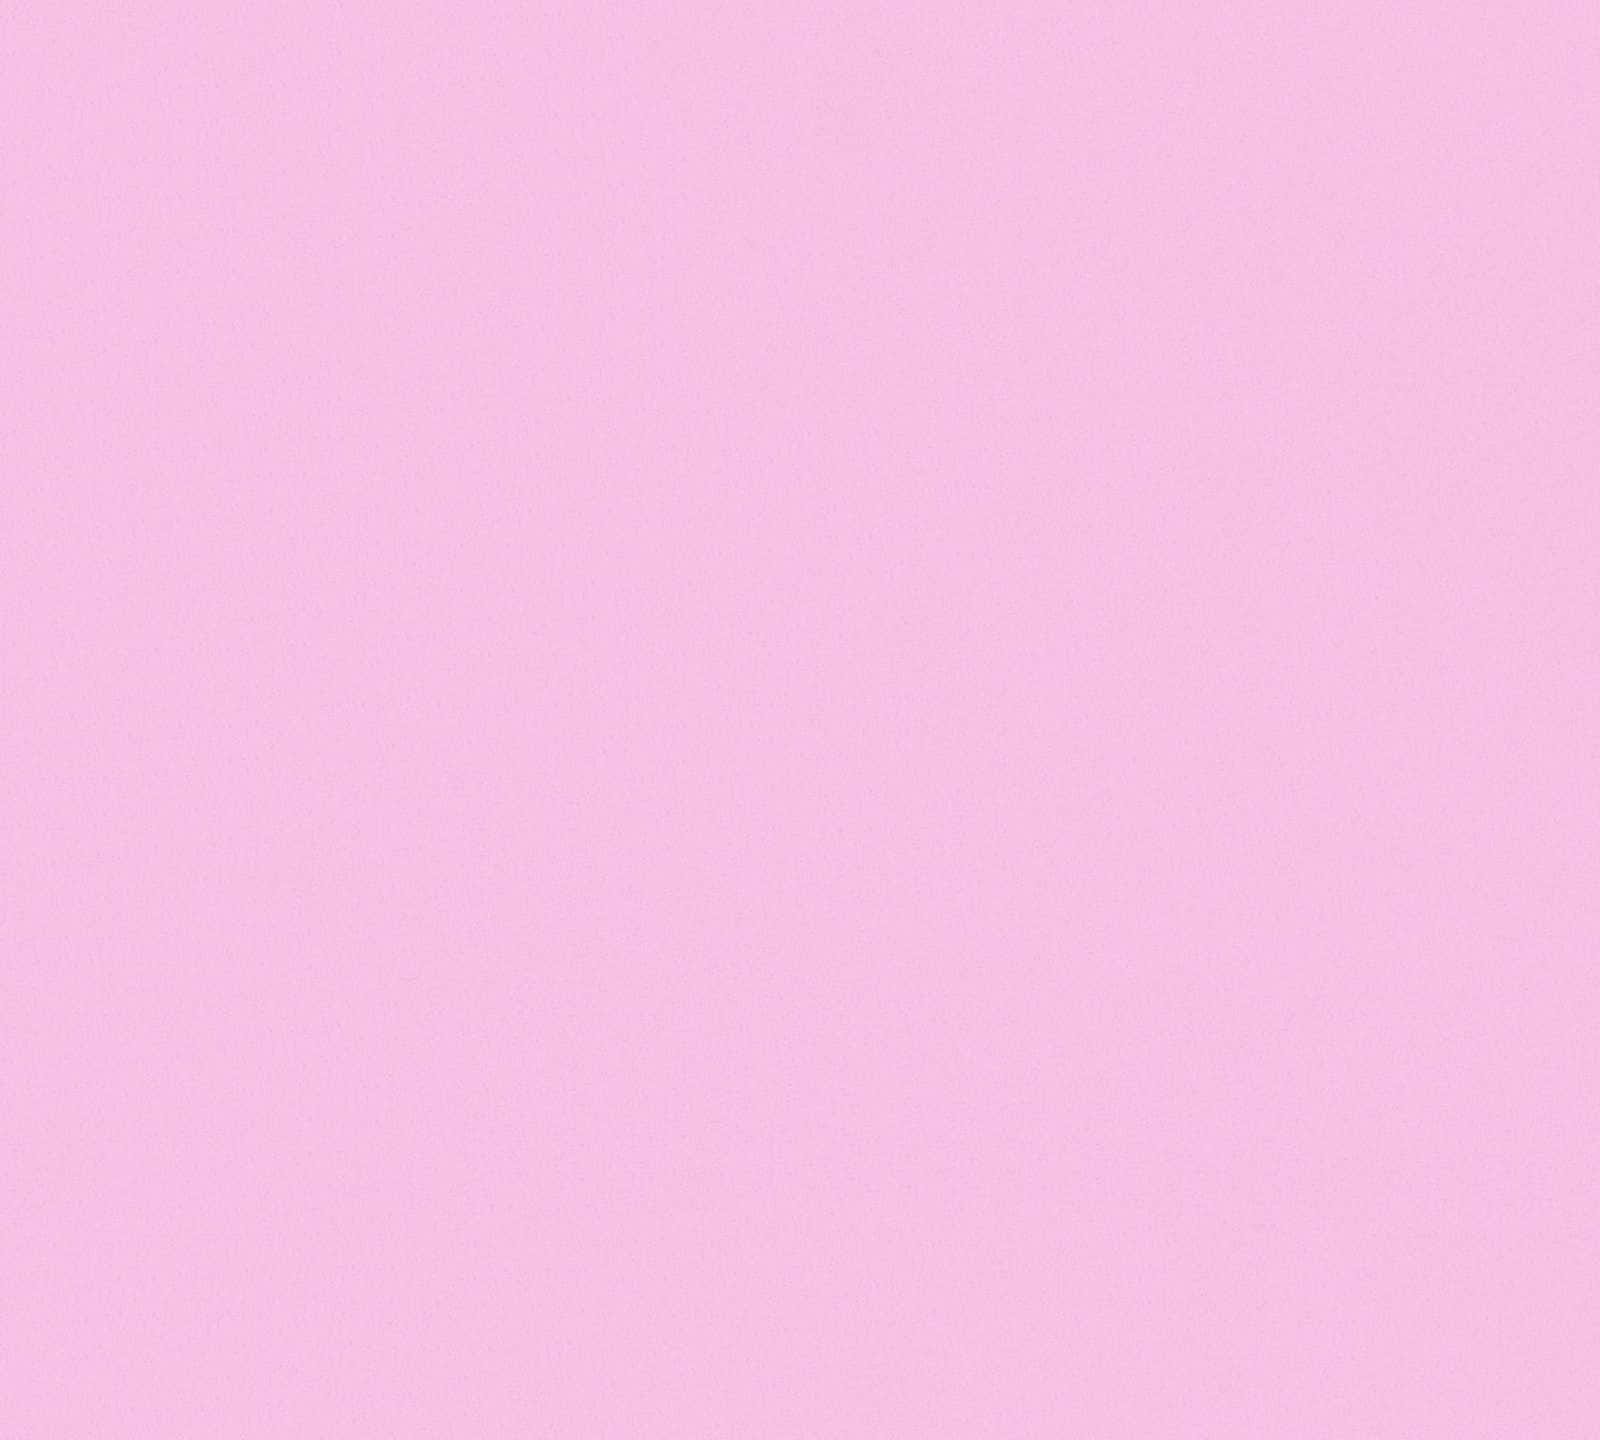 A Pink Background With A White Square